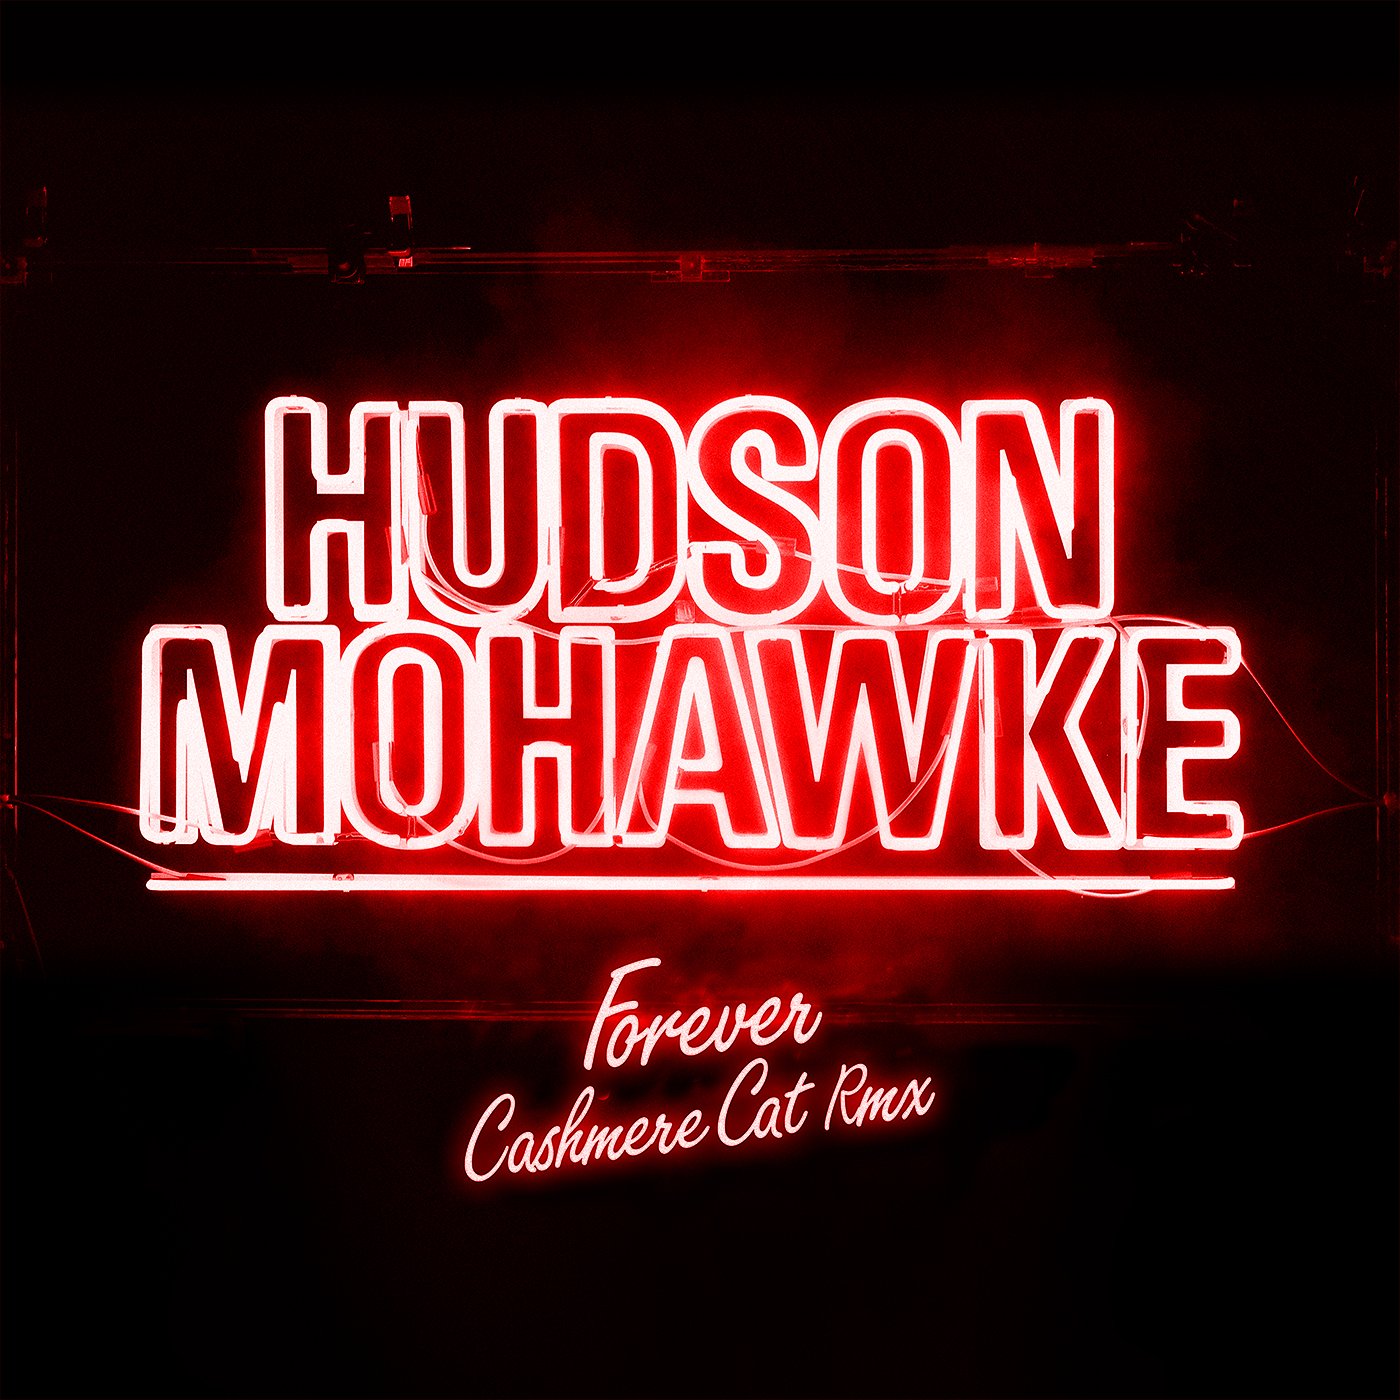 oops oh my remix hudson mohawke torrent